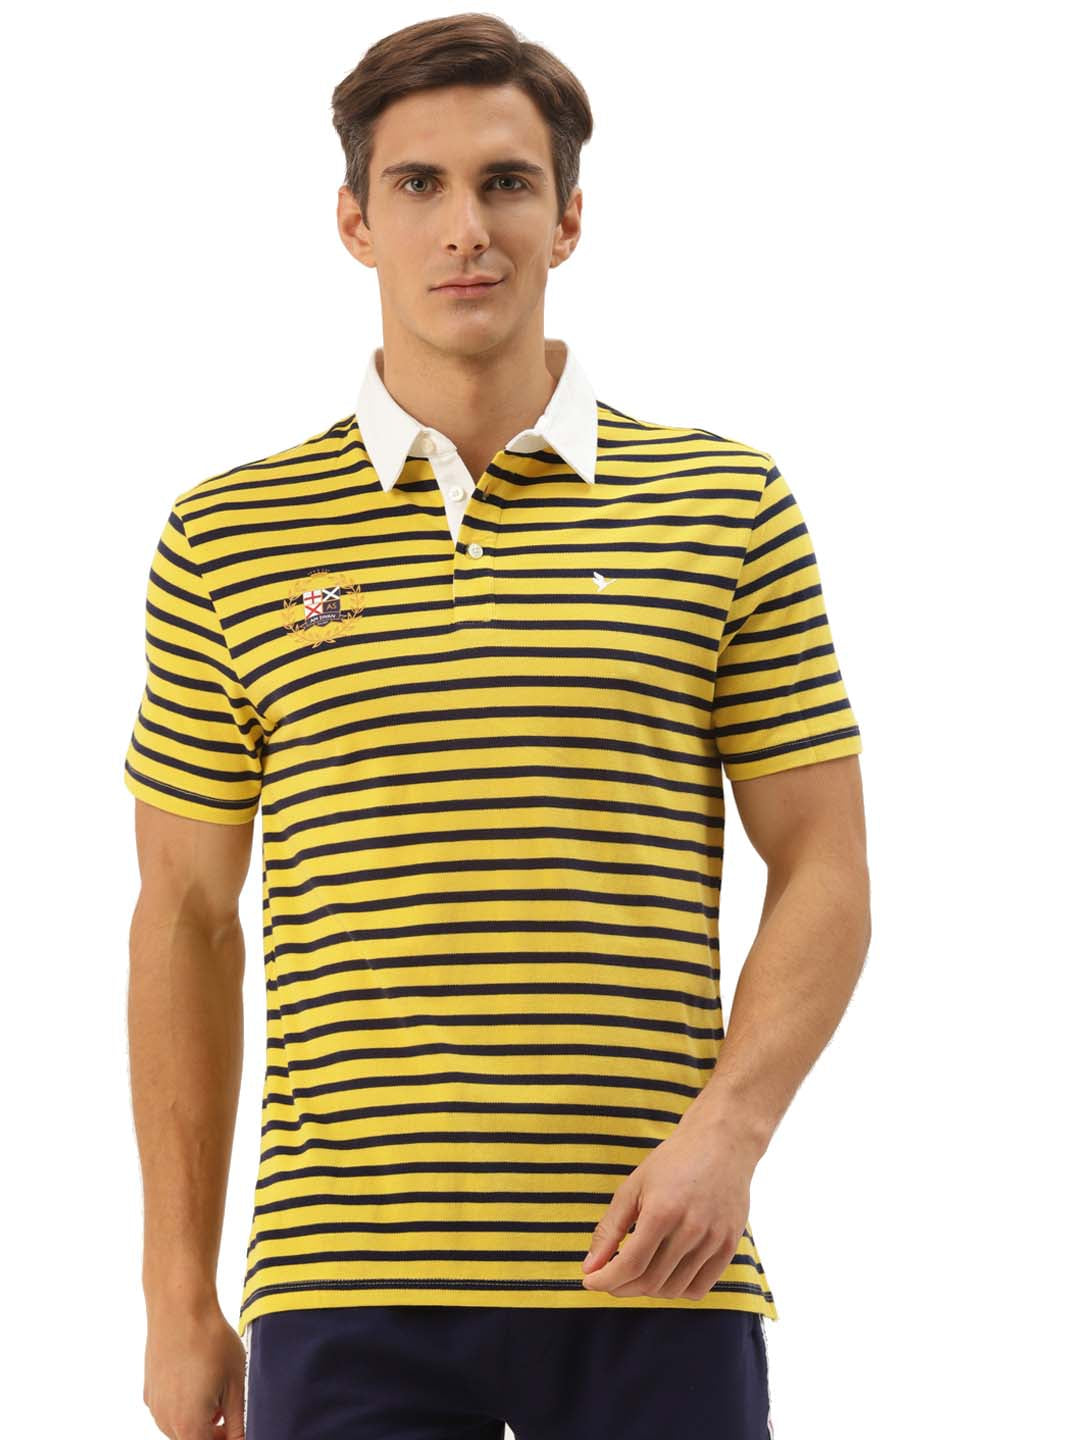 Men's Striped Collar T-Shirts with Half Sleeves in Premium Cotton